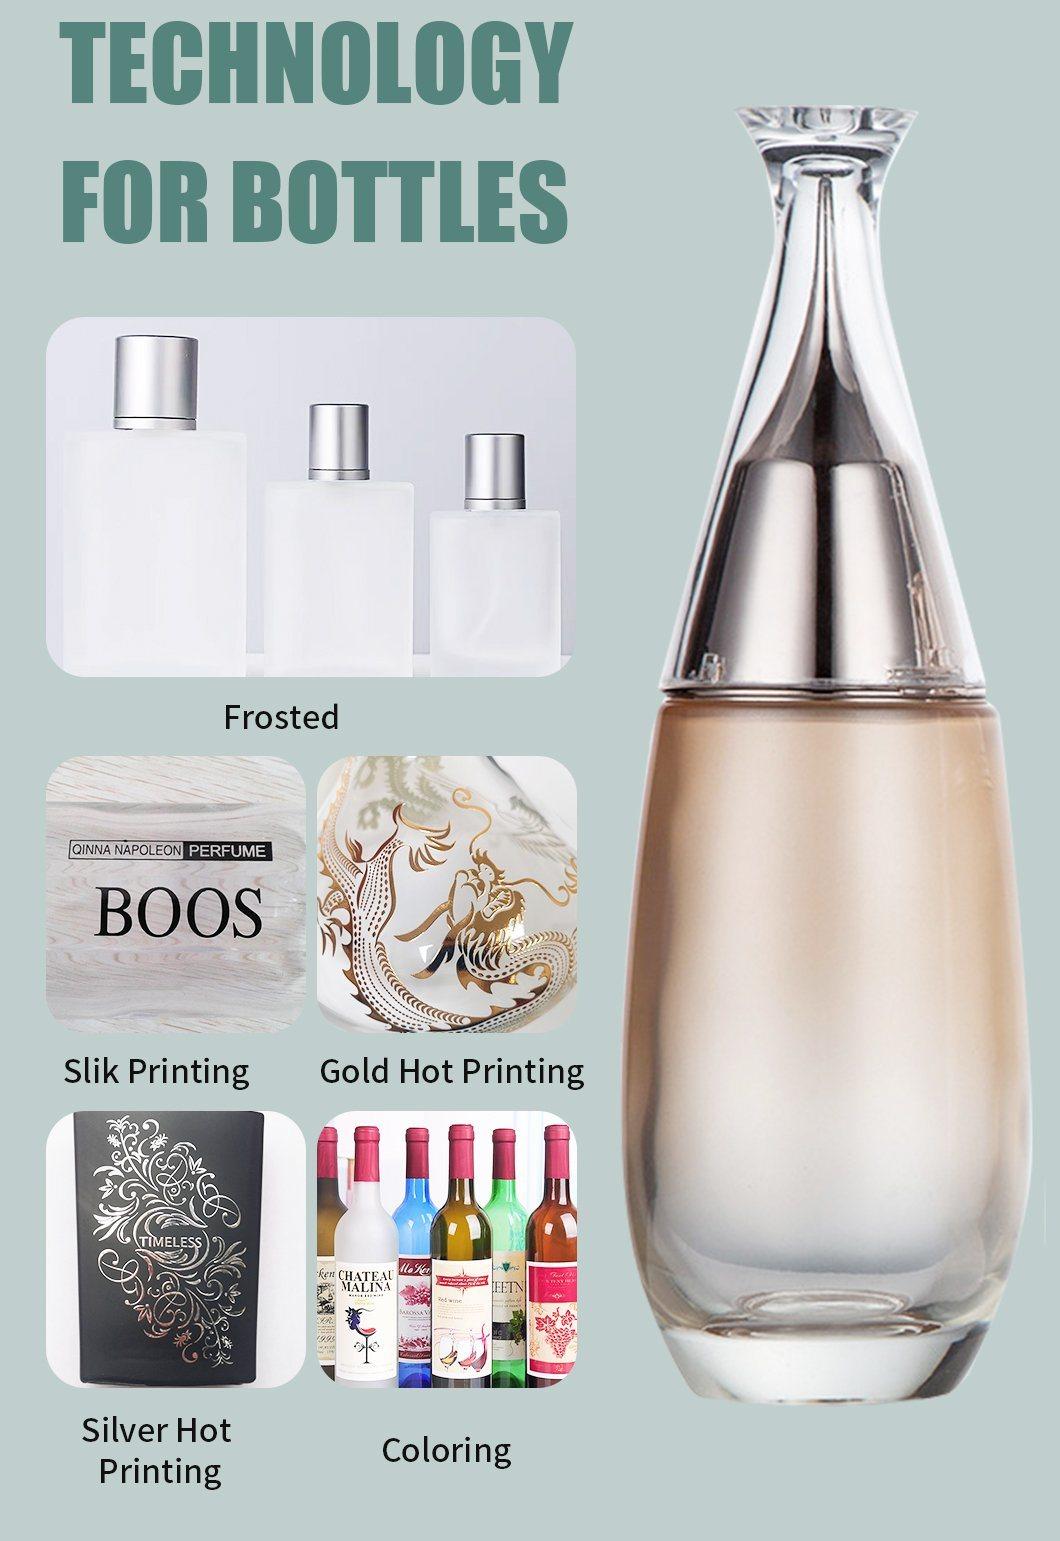 Clear and Frosted Customize Makeups Crystal Glass Perfume Cosmetics Bottle with Press Pump